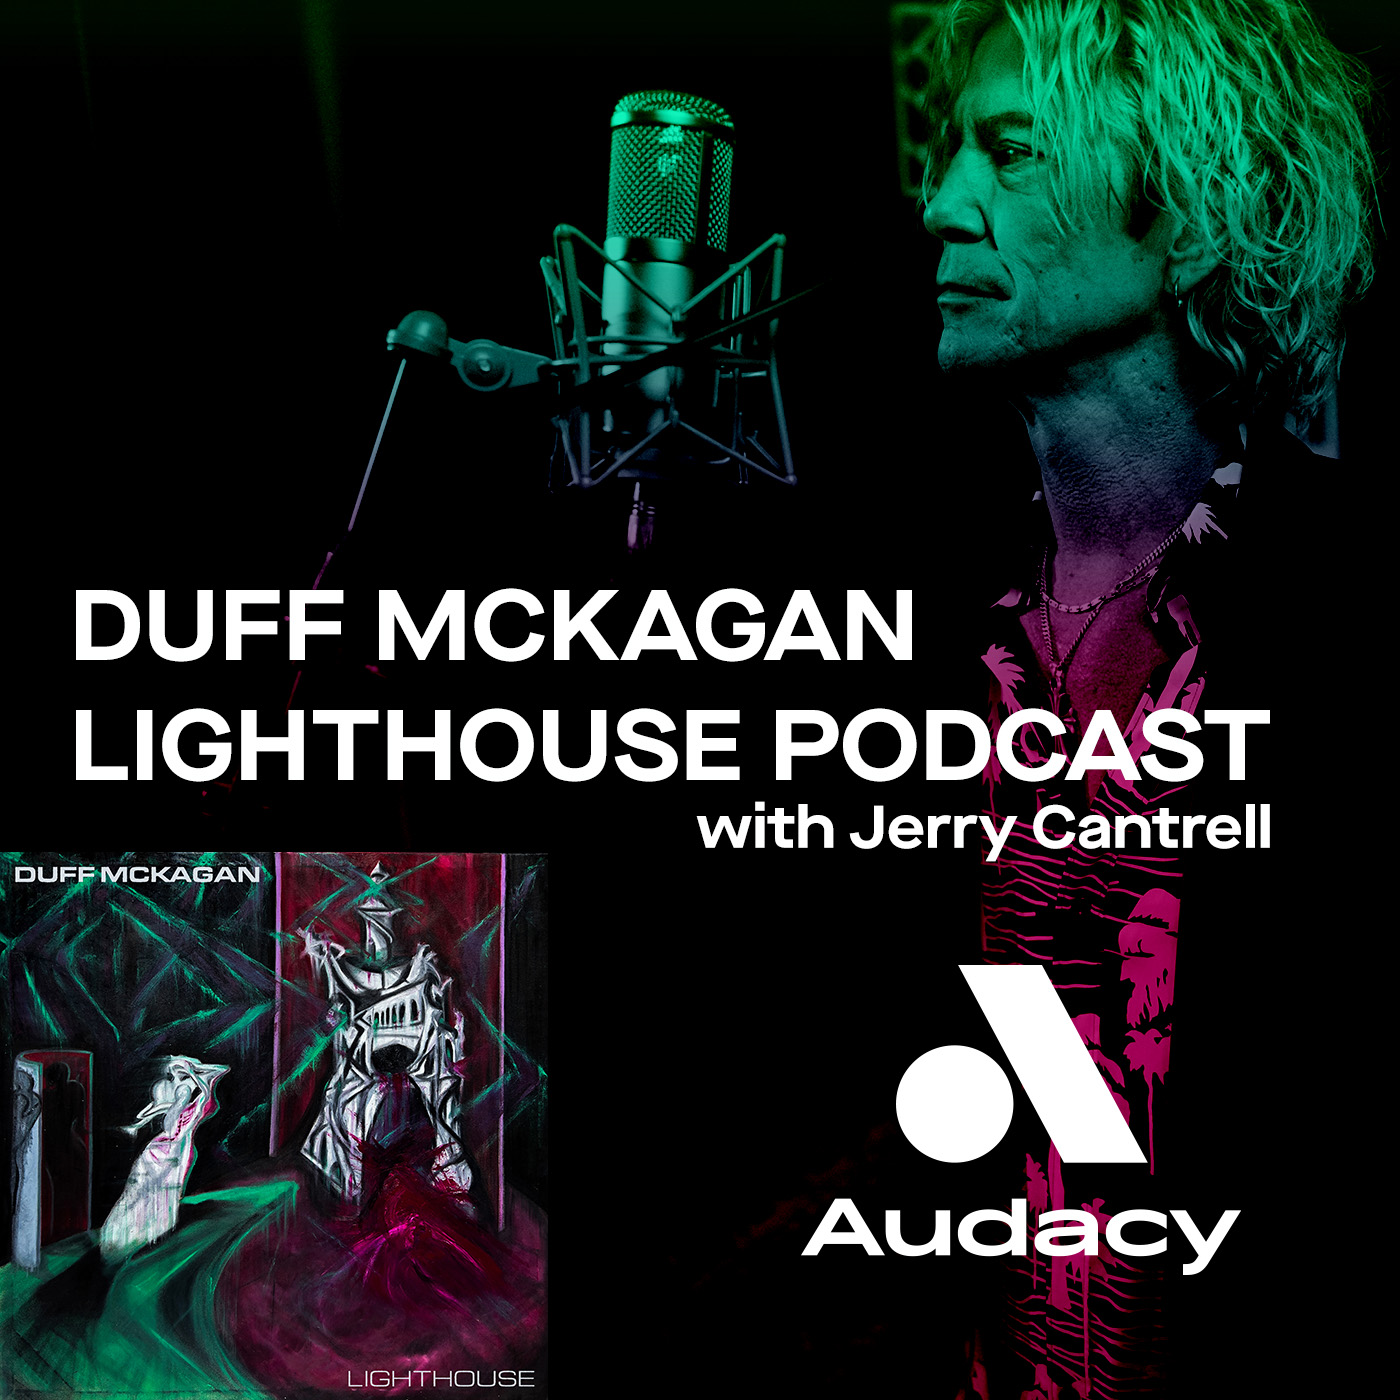 Duff McKagan Lighthouse Podcast with Jerry Cantrell - Episode 1